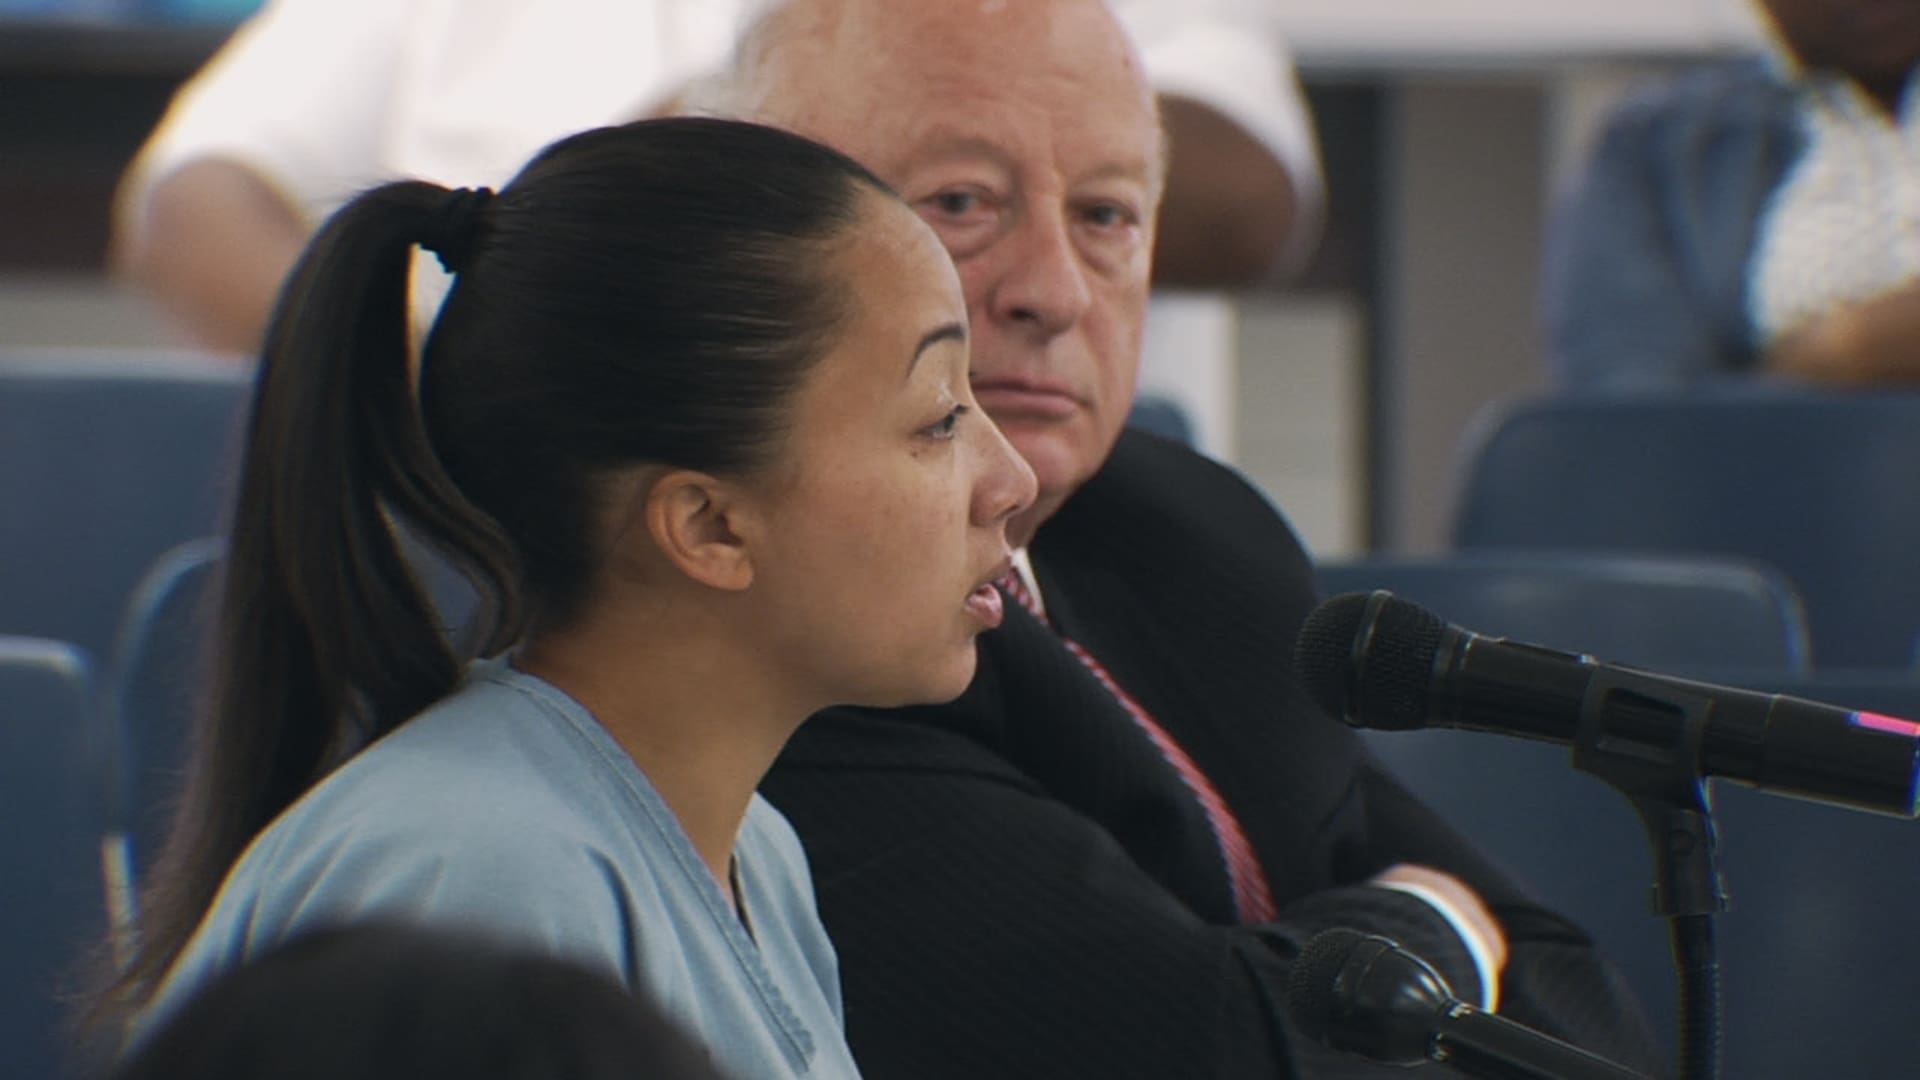 Murder to Mercy - The Cyntoia Brown Story